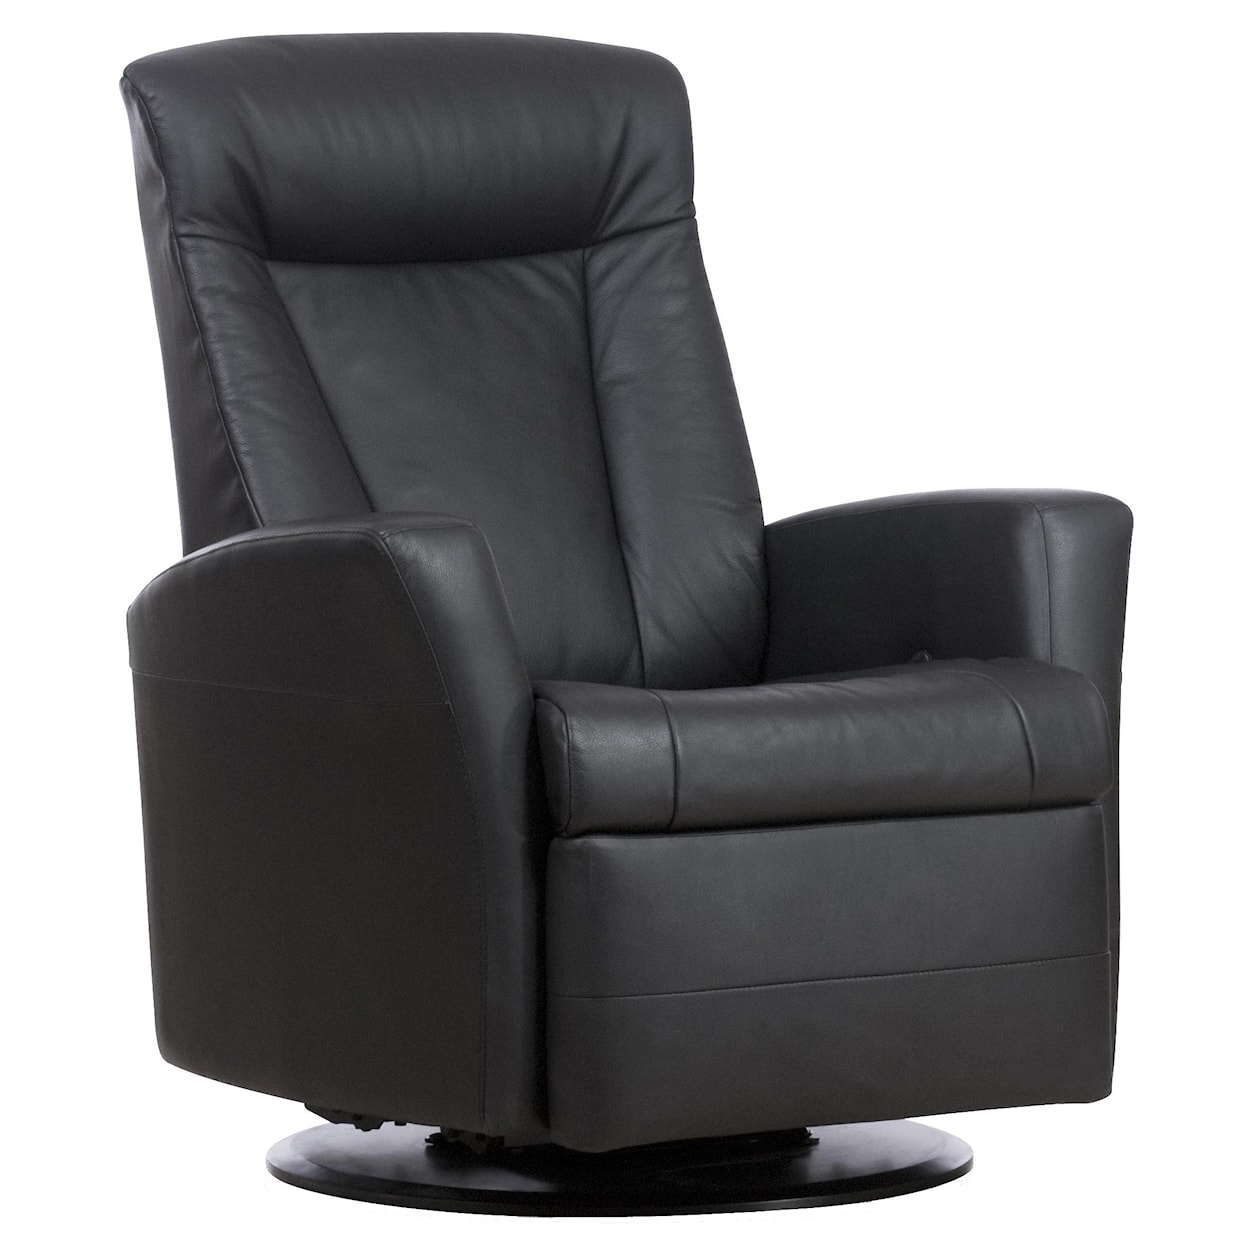 IMG Norway Prince  Prince Relaxer Recliner